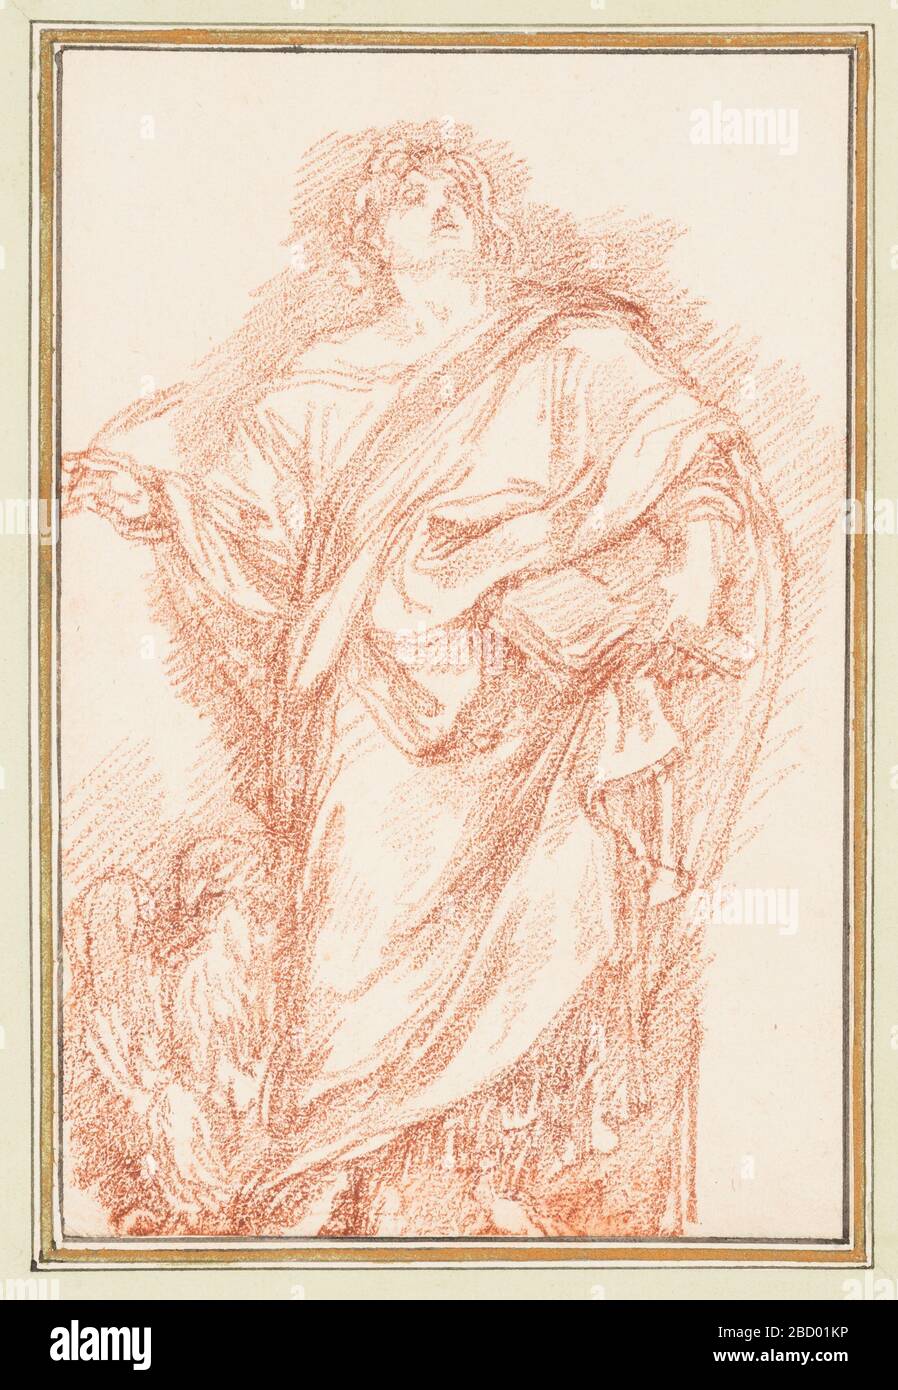 St John from St John Laterans Basilica. Research in ProgressDrawing after statue by Camillo Rusconi of St. John the Baptist from St. John Lateran's Basilica (S. Giovanni in Laterano). St. John's head is tilted upward. He holds an open book against his body in his left hand and holds a quill in his right. St John from St John Laterans Basilica Stock Photo